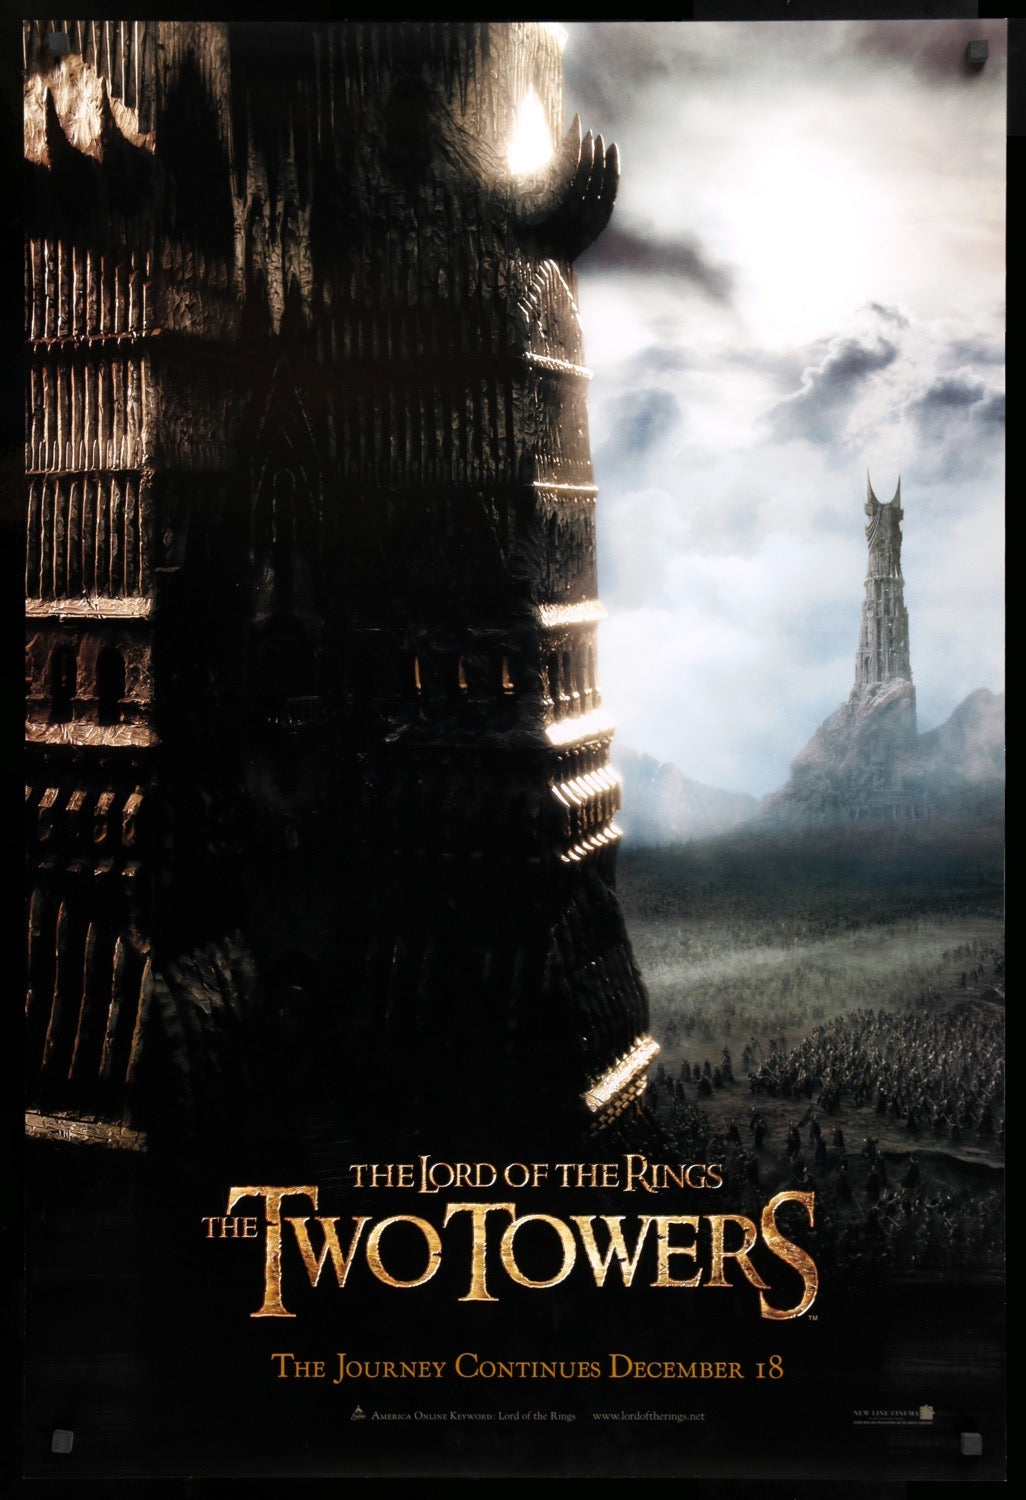 The Lord of the Rings: The Two Towers, Retro Review